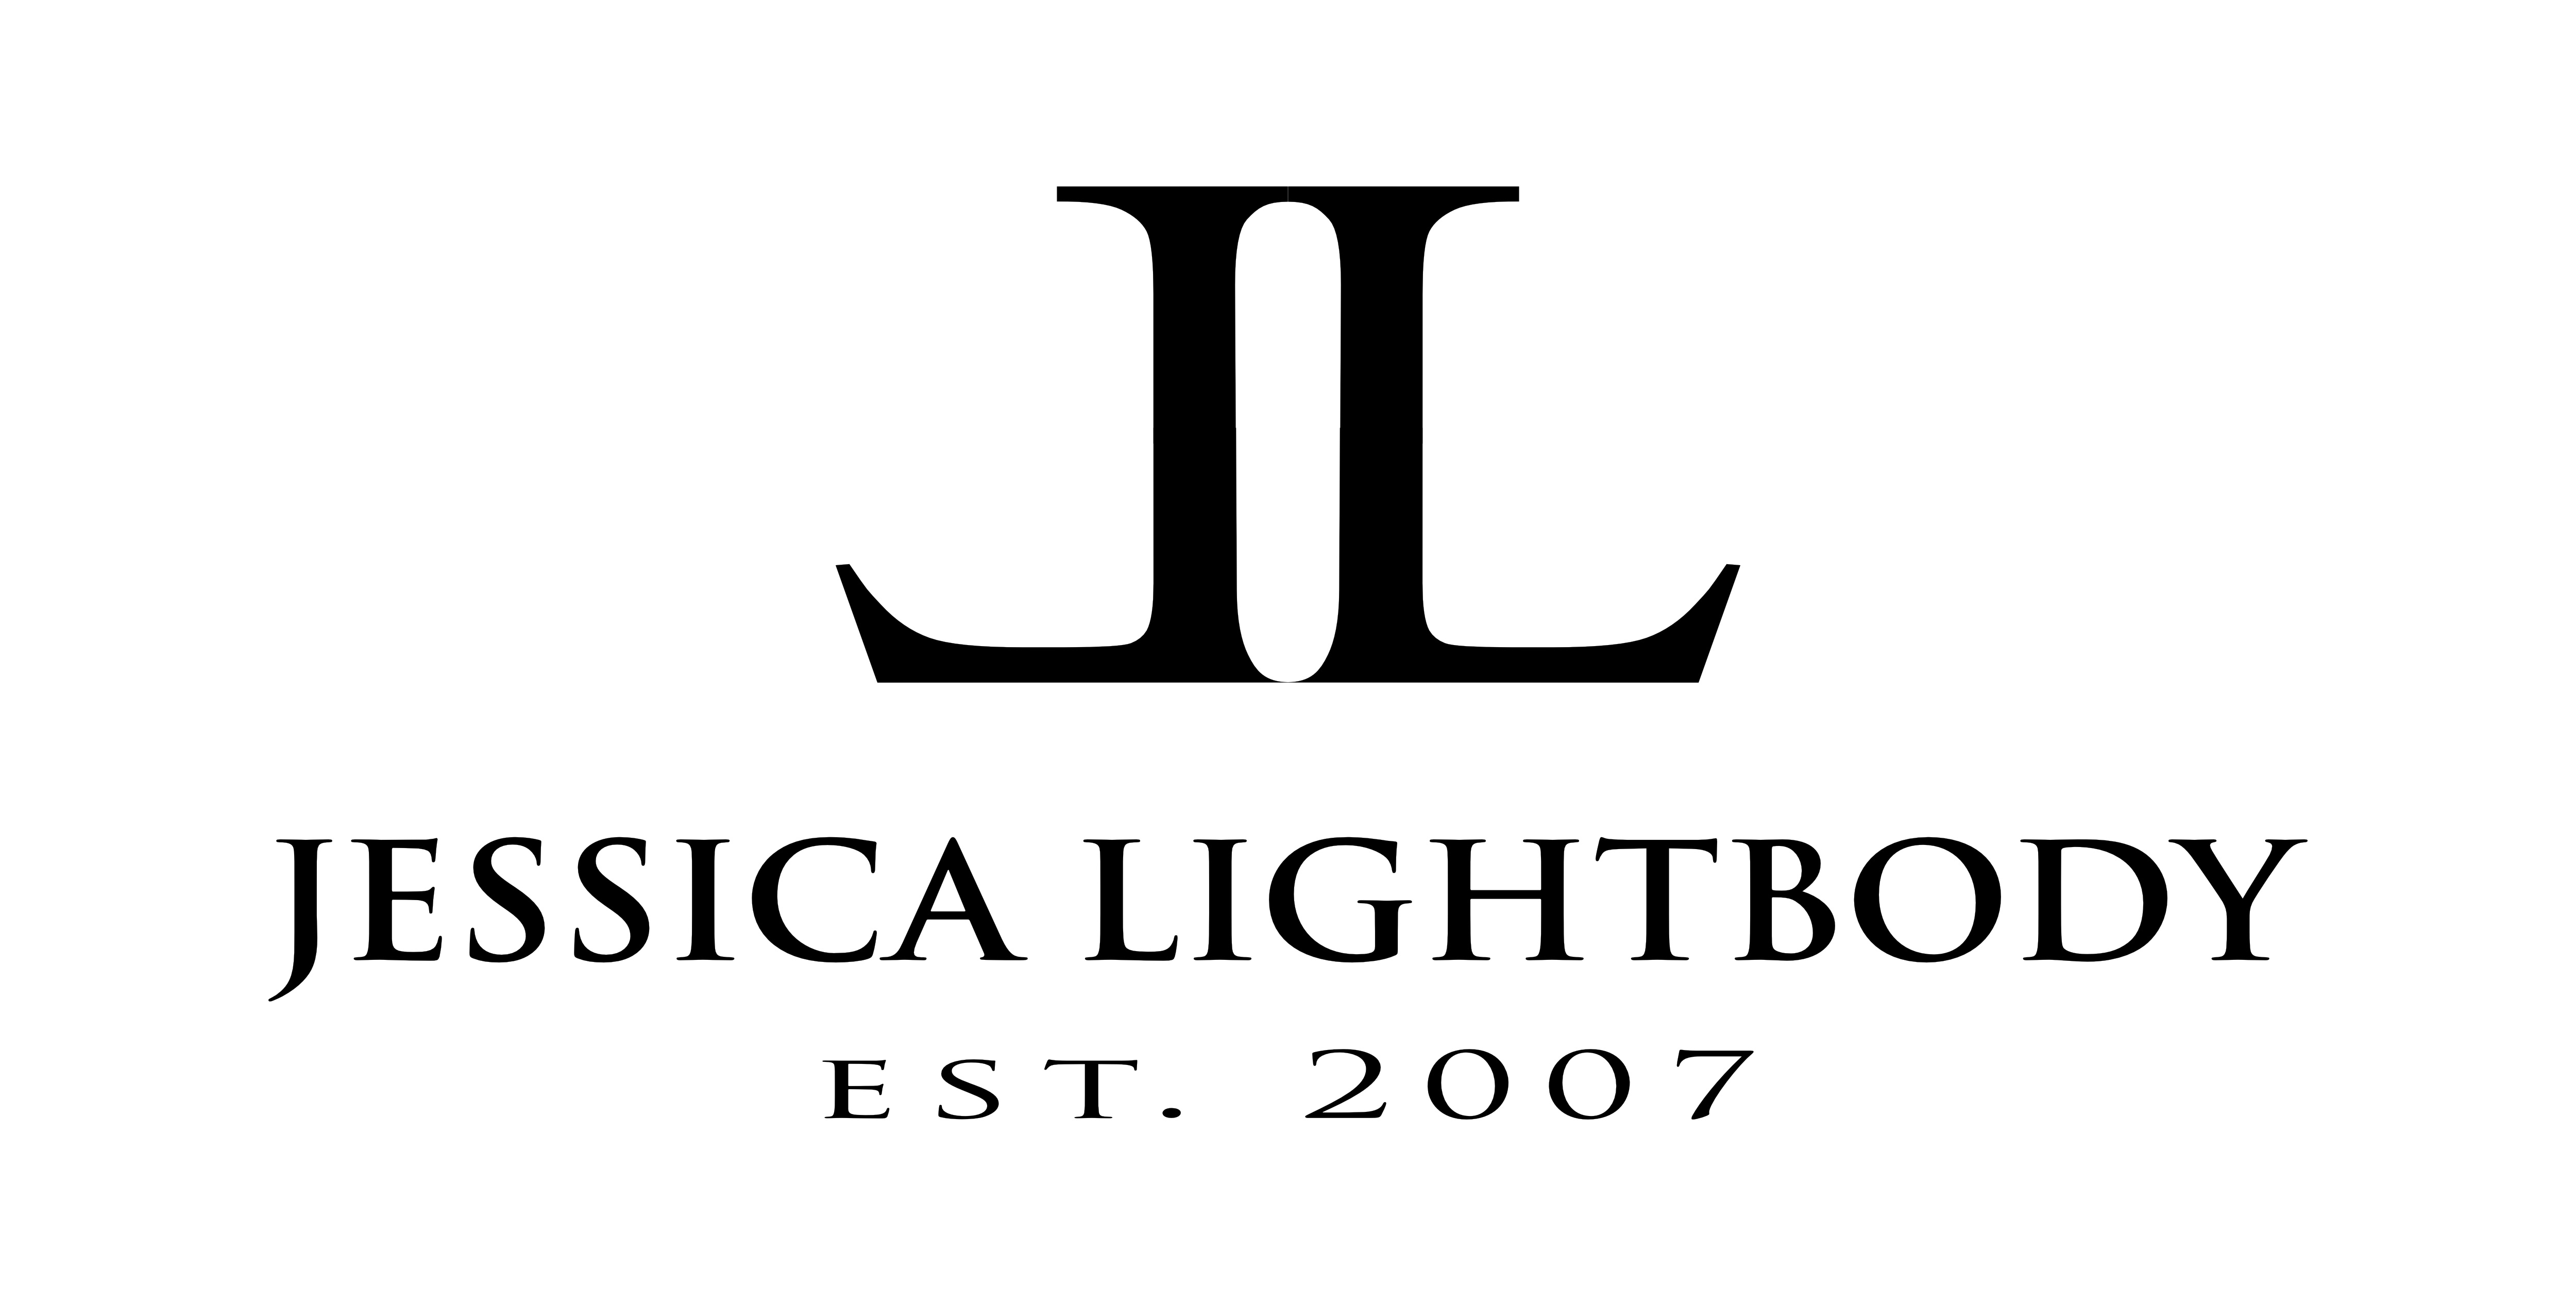 Company Jessica Lightbody Limited. Description and contact information.